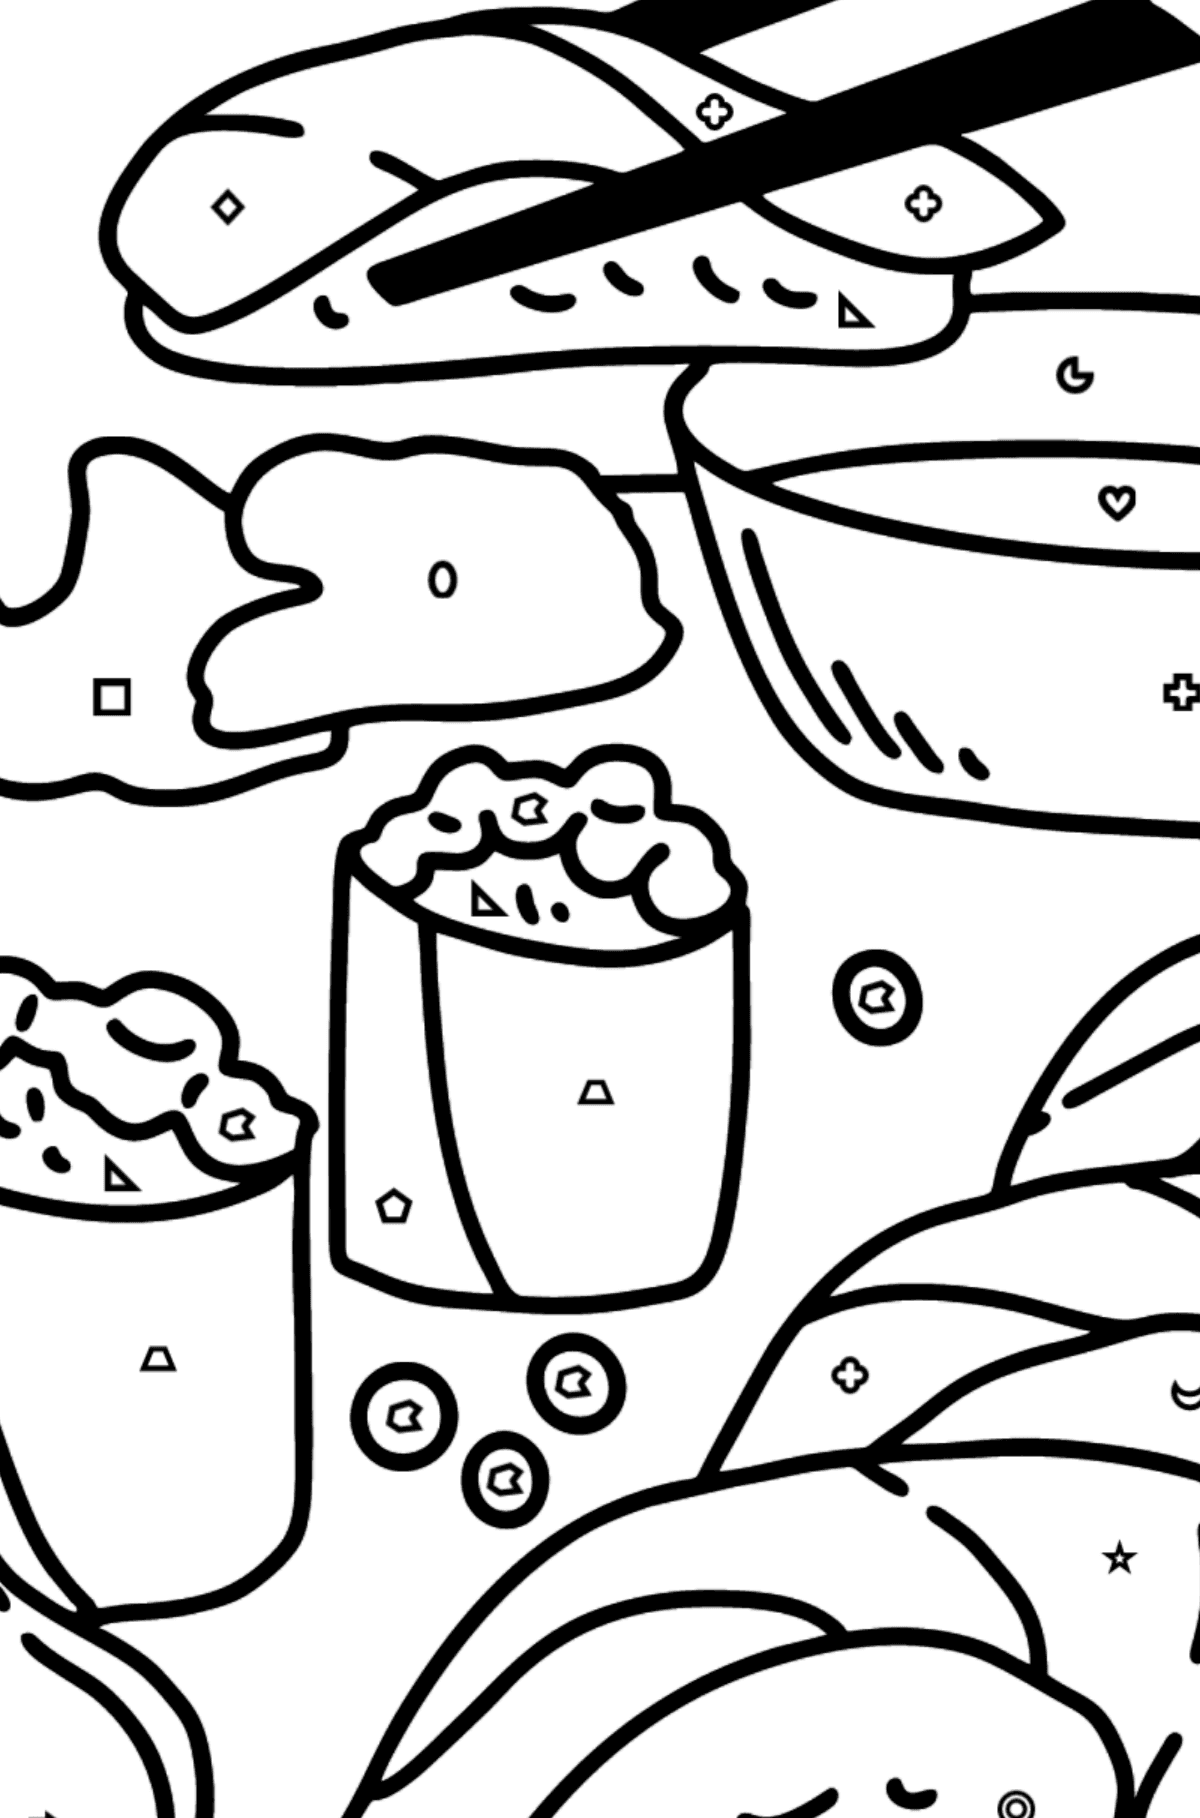 Sushi coloring page - Coloring by Geometric Shapes for Kids